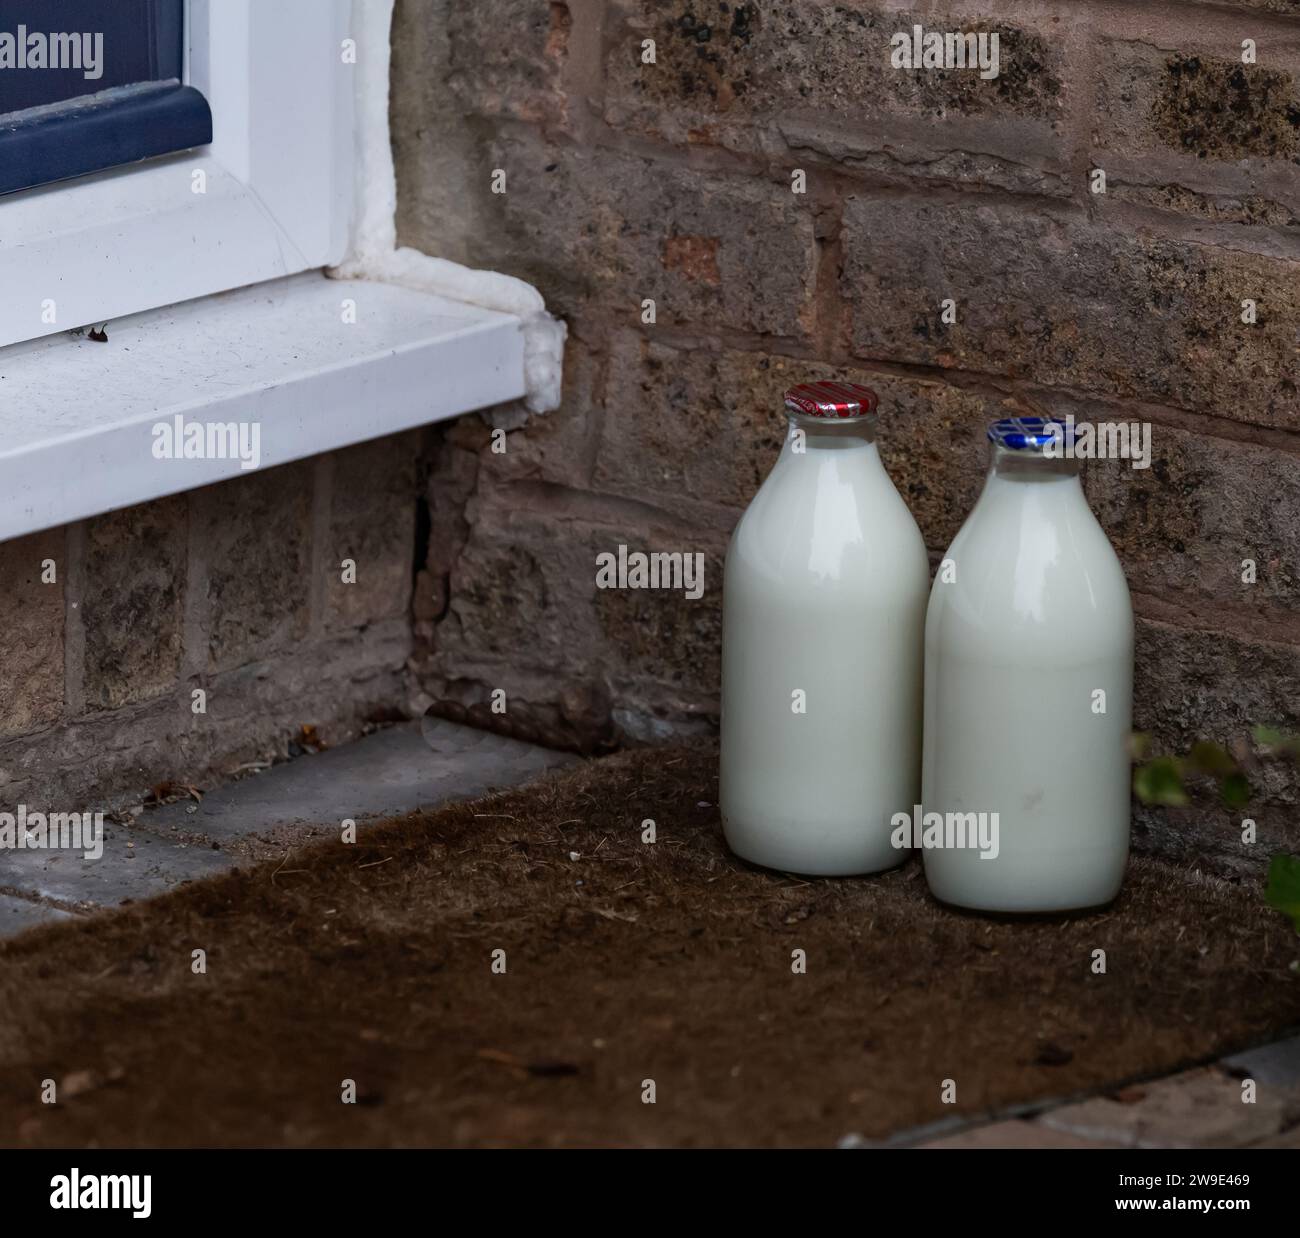 Doorstep milk delivery UK. A pint of skimmed milk and a pint of semi skimmed milk in glass bottles on a doorstep left by a milkman in the UK. Stock Photo